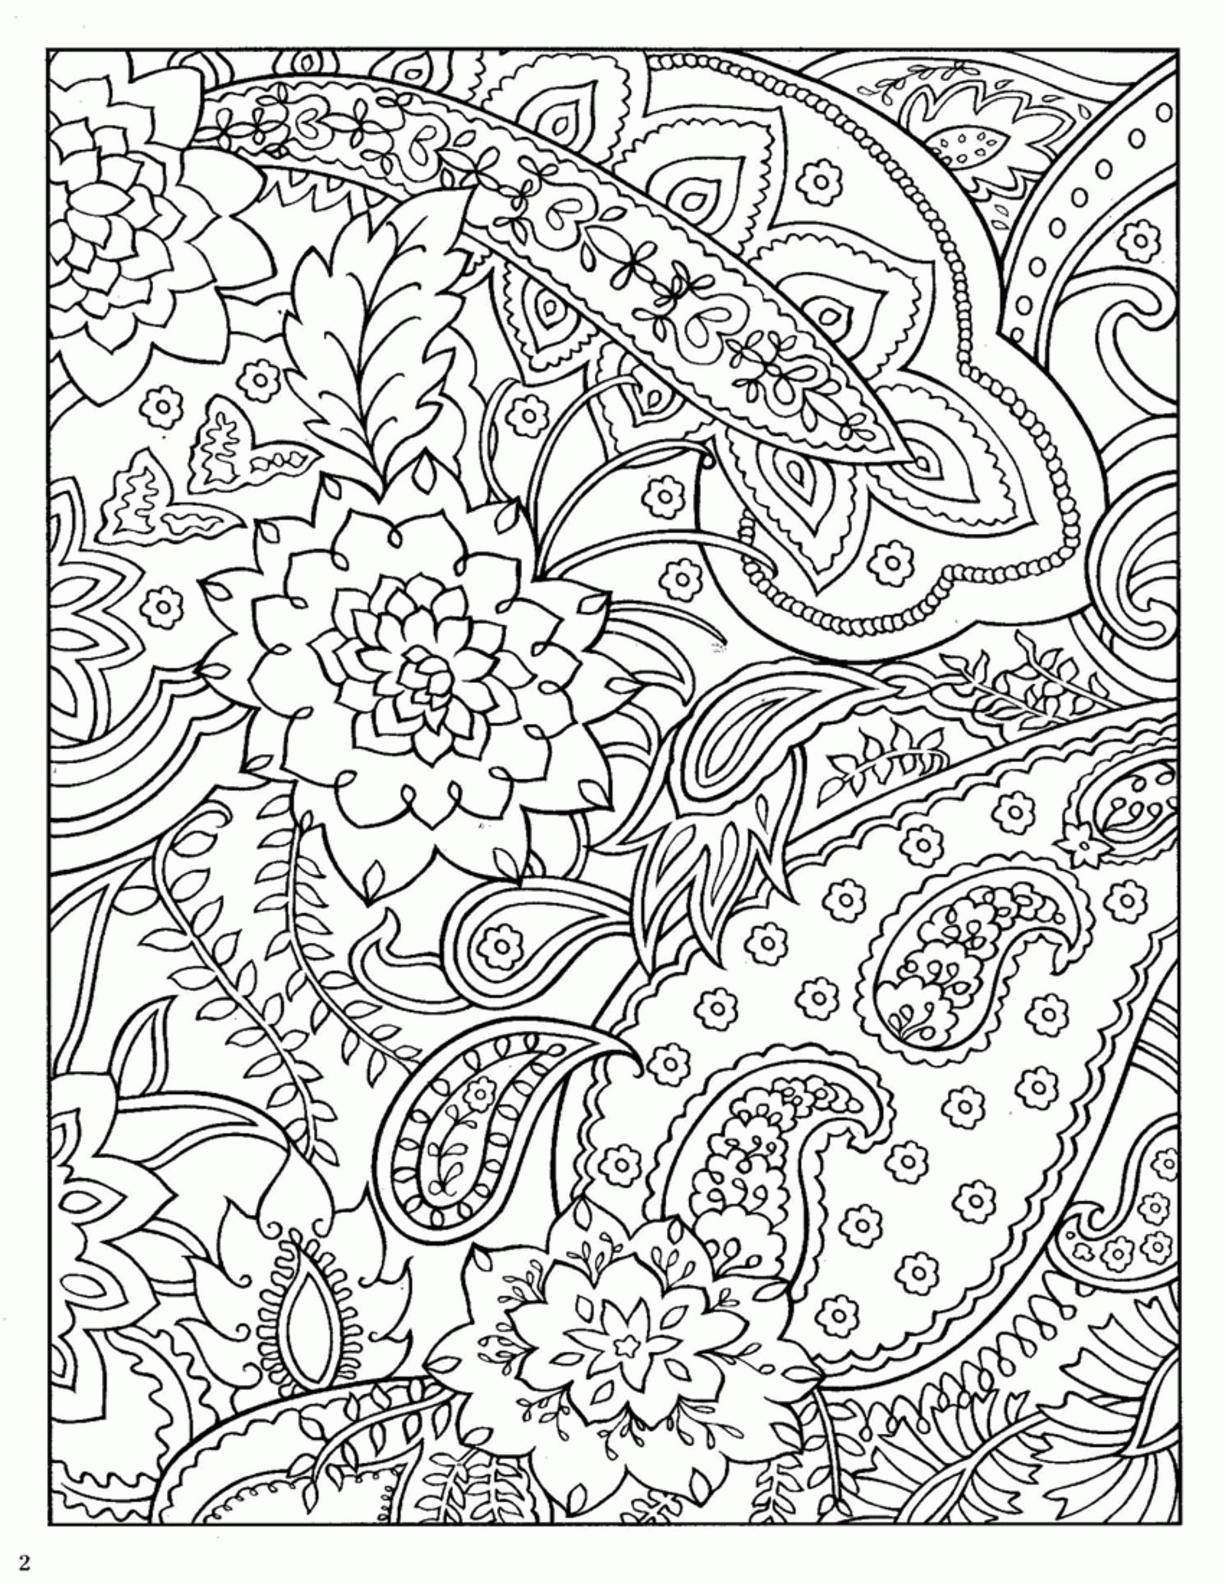 coloring pages for adults paisley